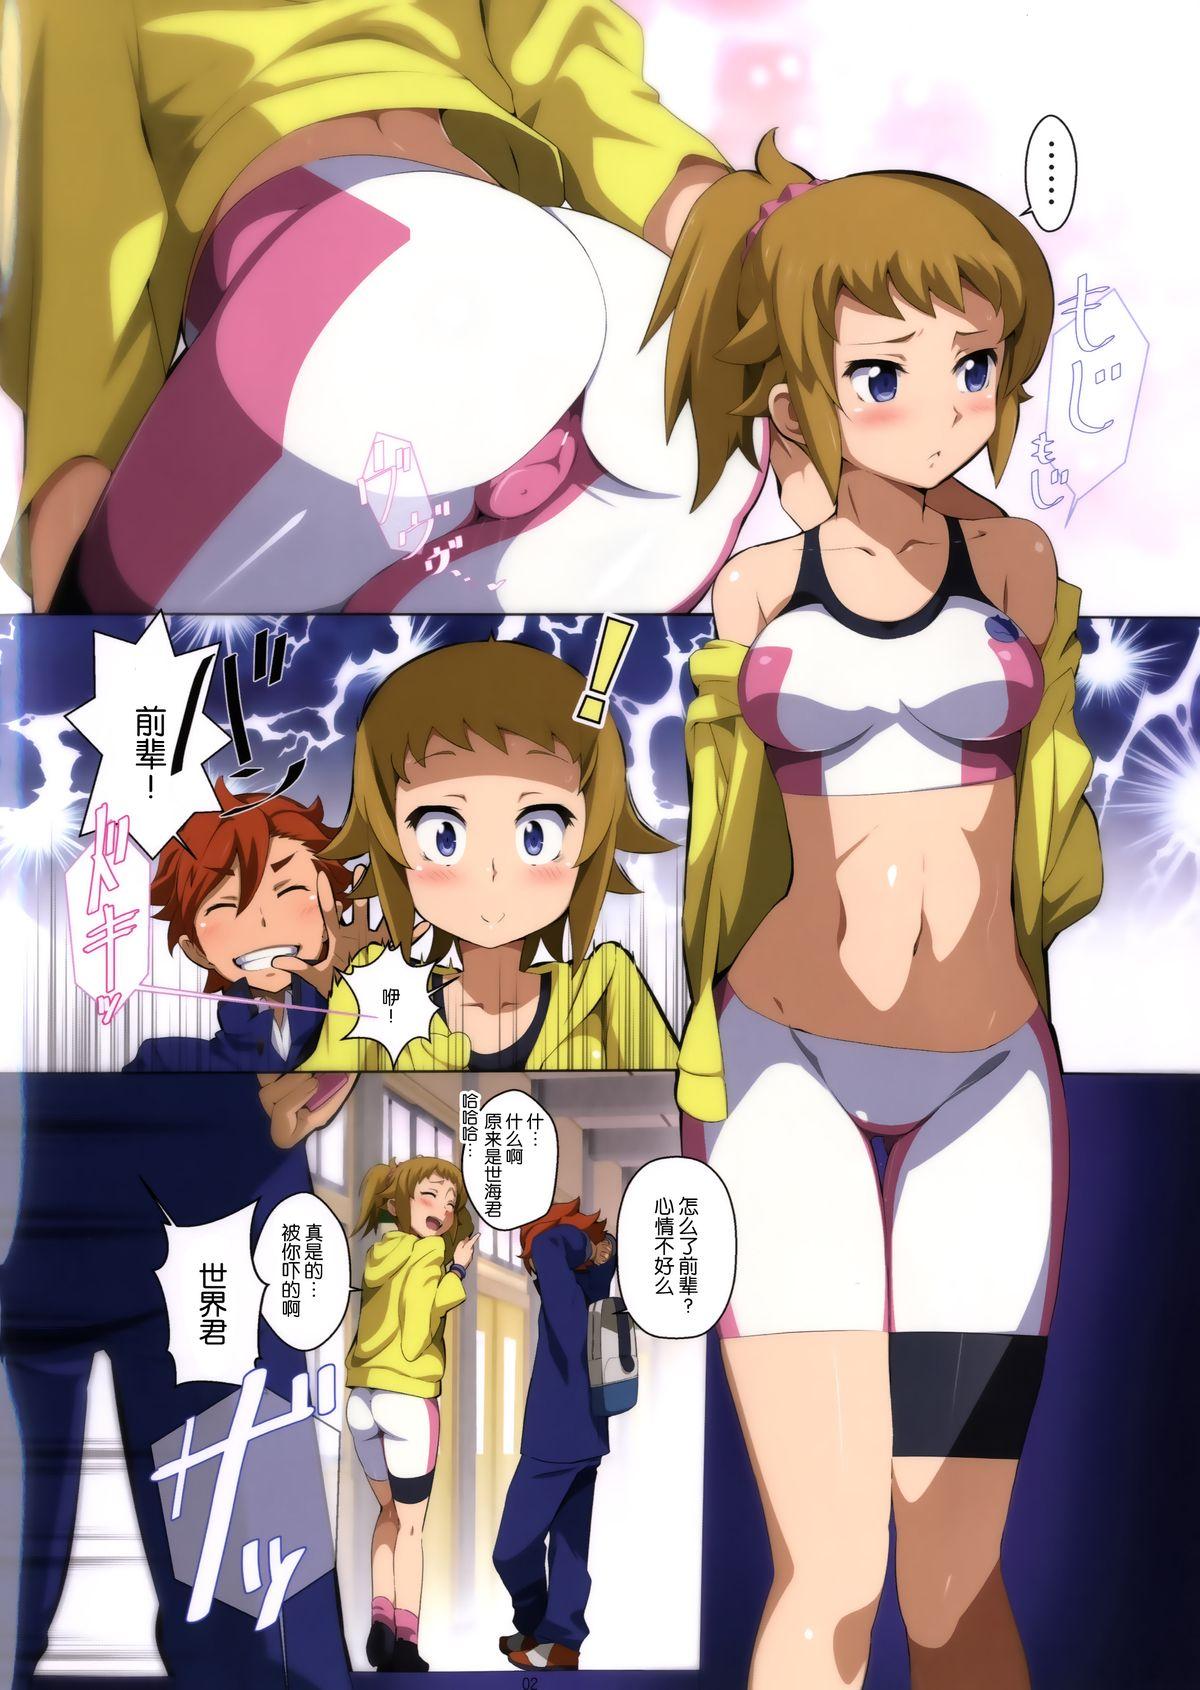 Milfporn BATTLE END FUMINA - Gundam build fighters try Feet - Page 3